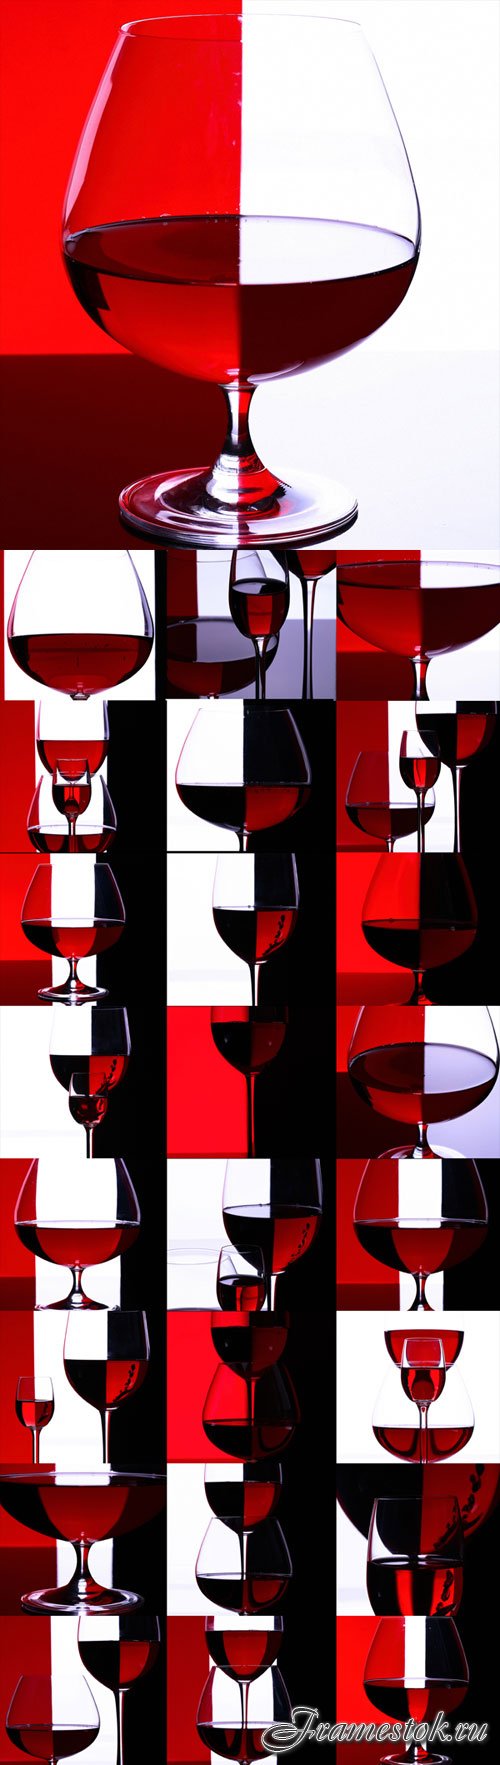 Several cocktails goblets, glasses are in colorful red, black combination